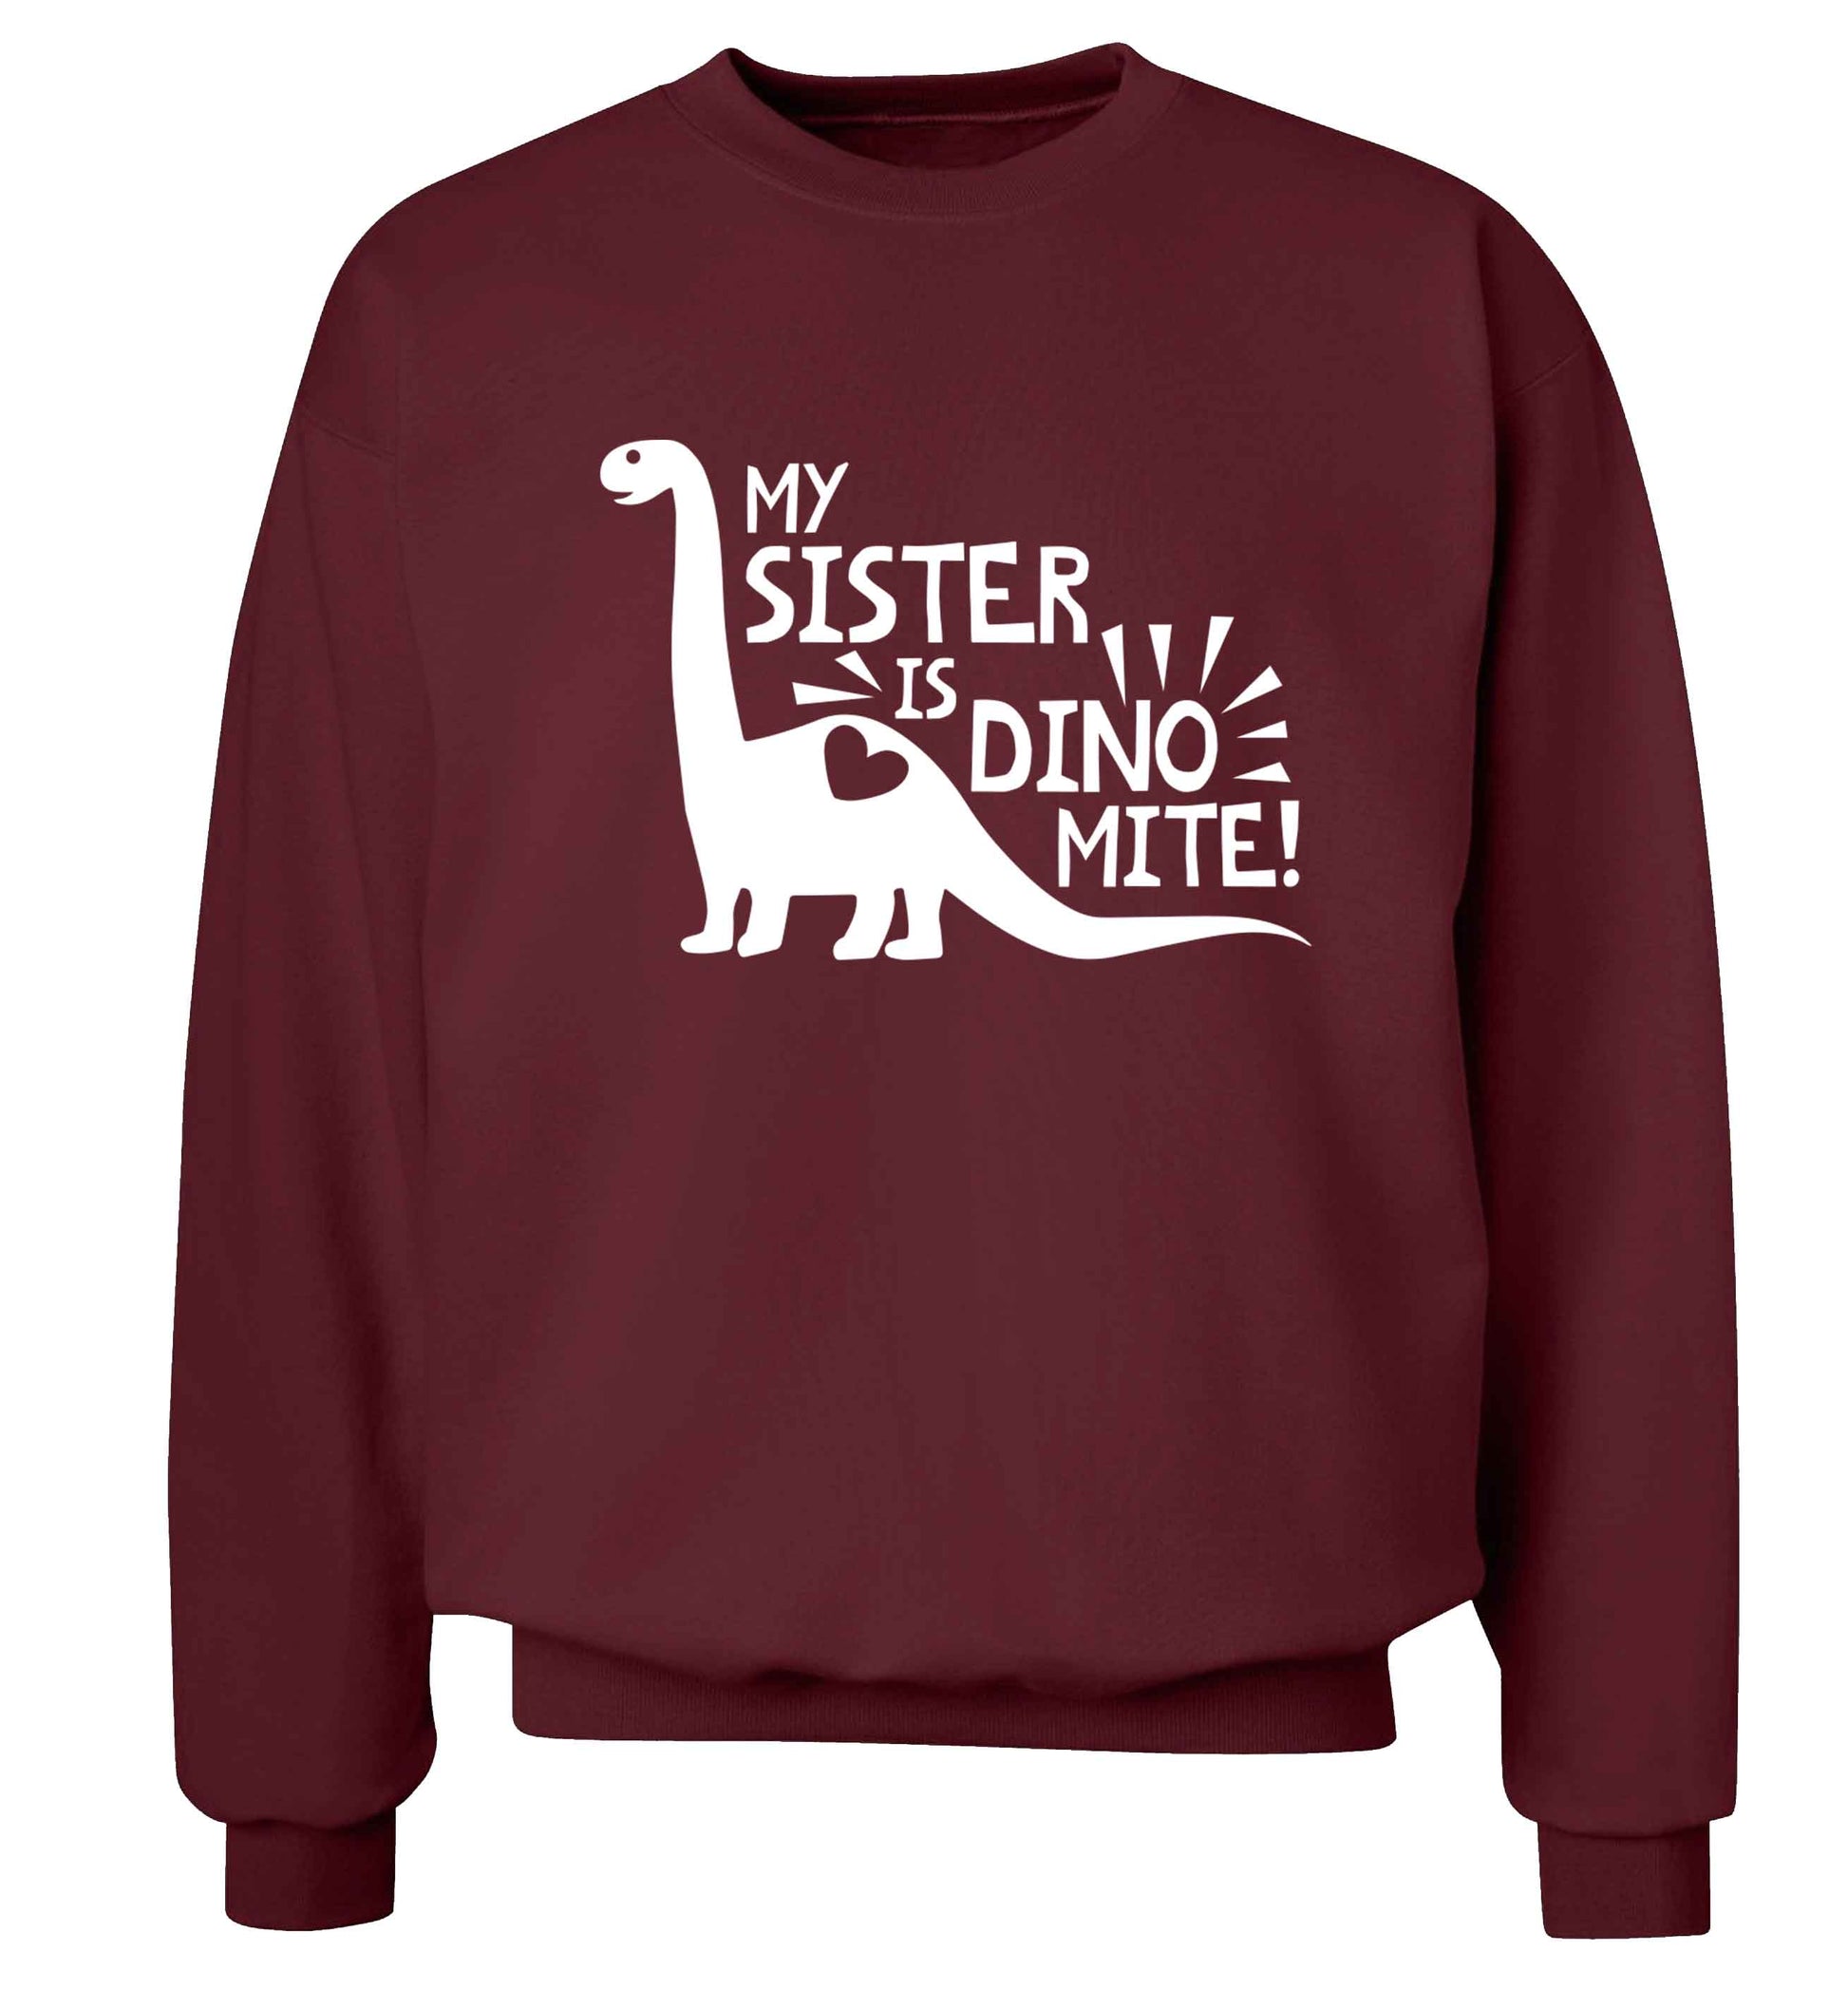 My sister is dinomite! Adult's unisex maroon Sweater 2XL